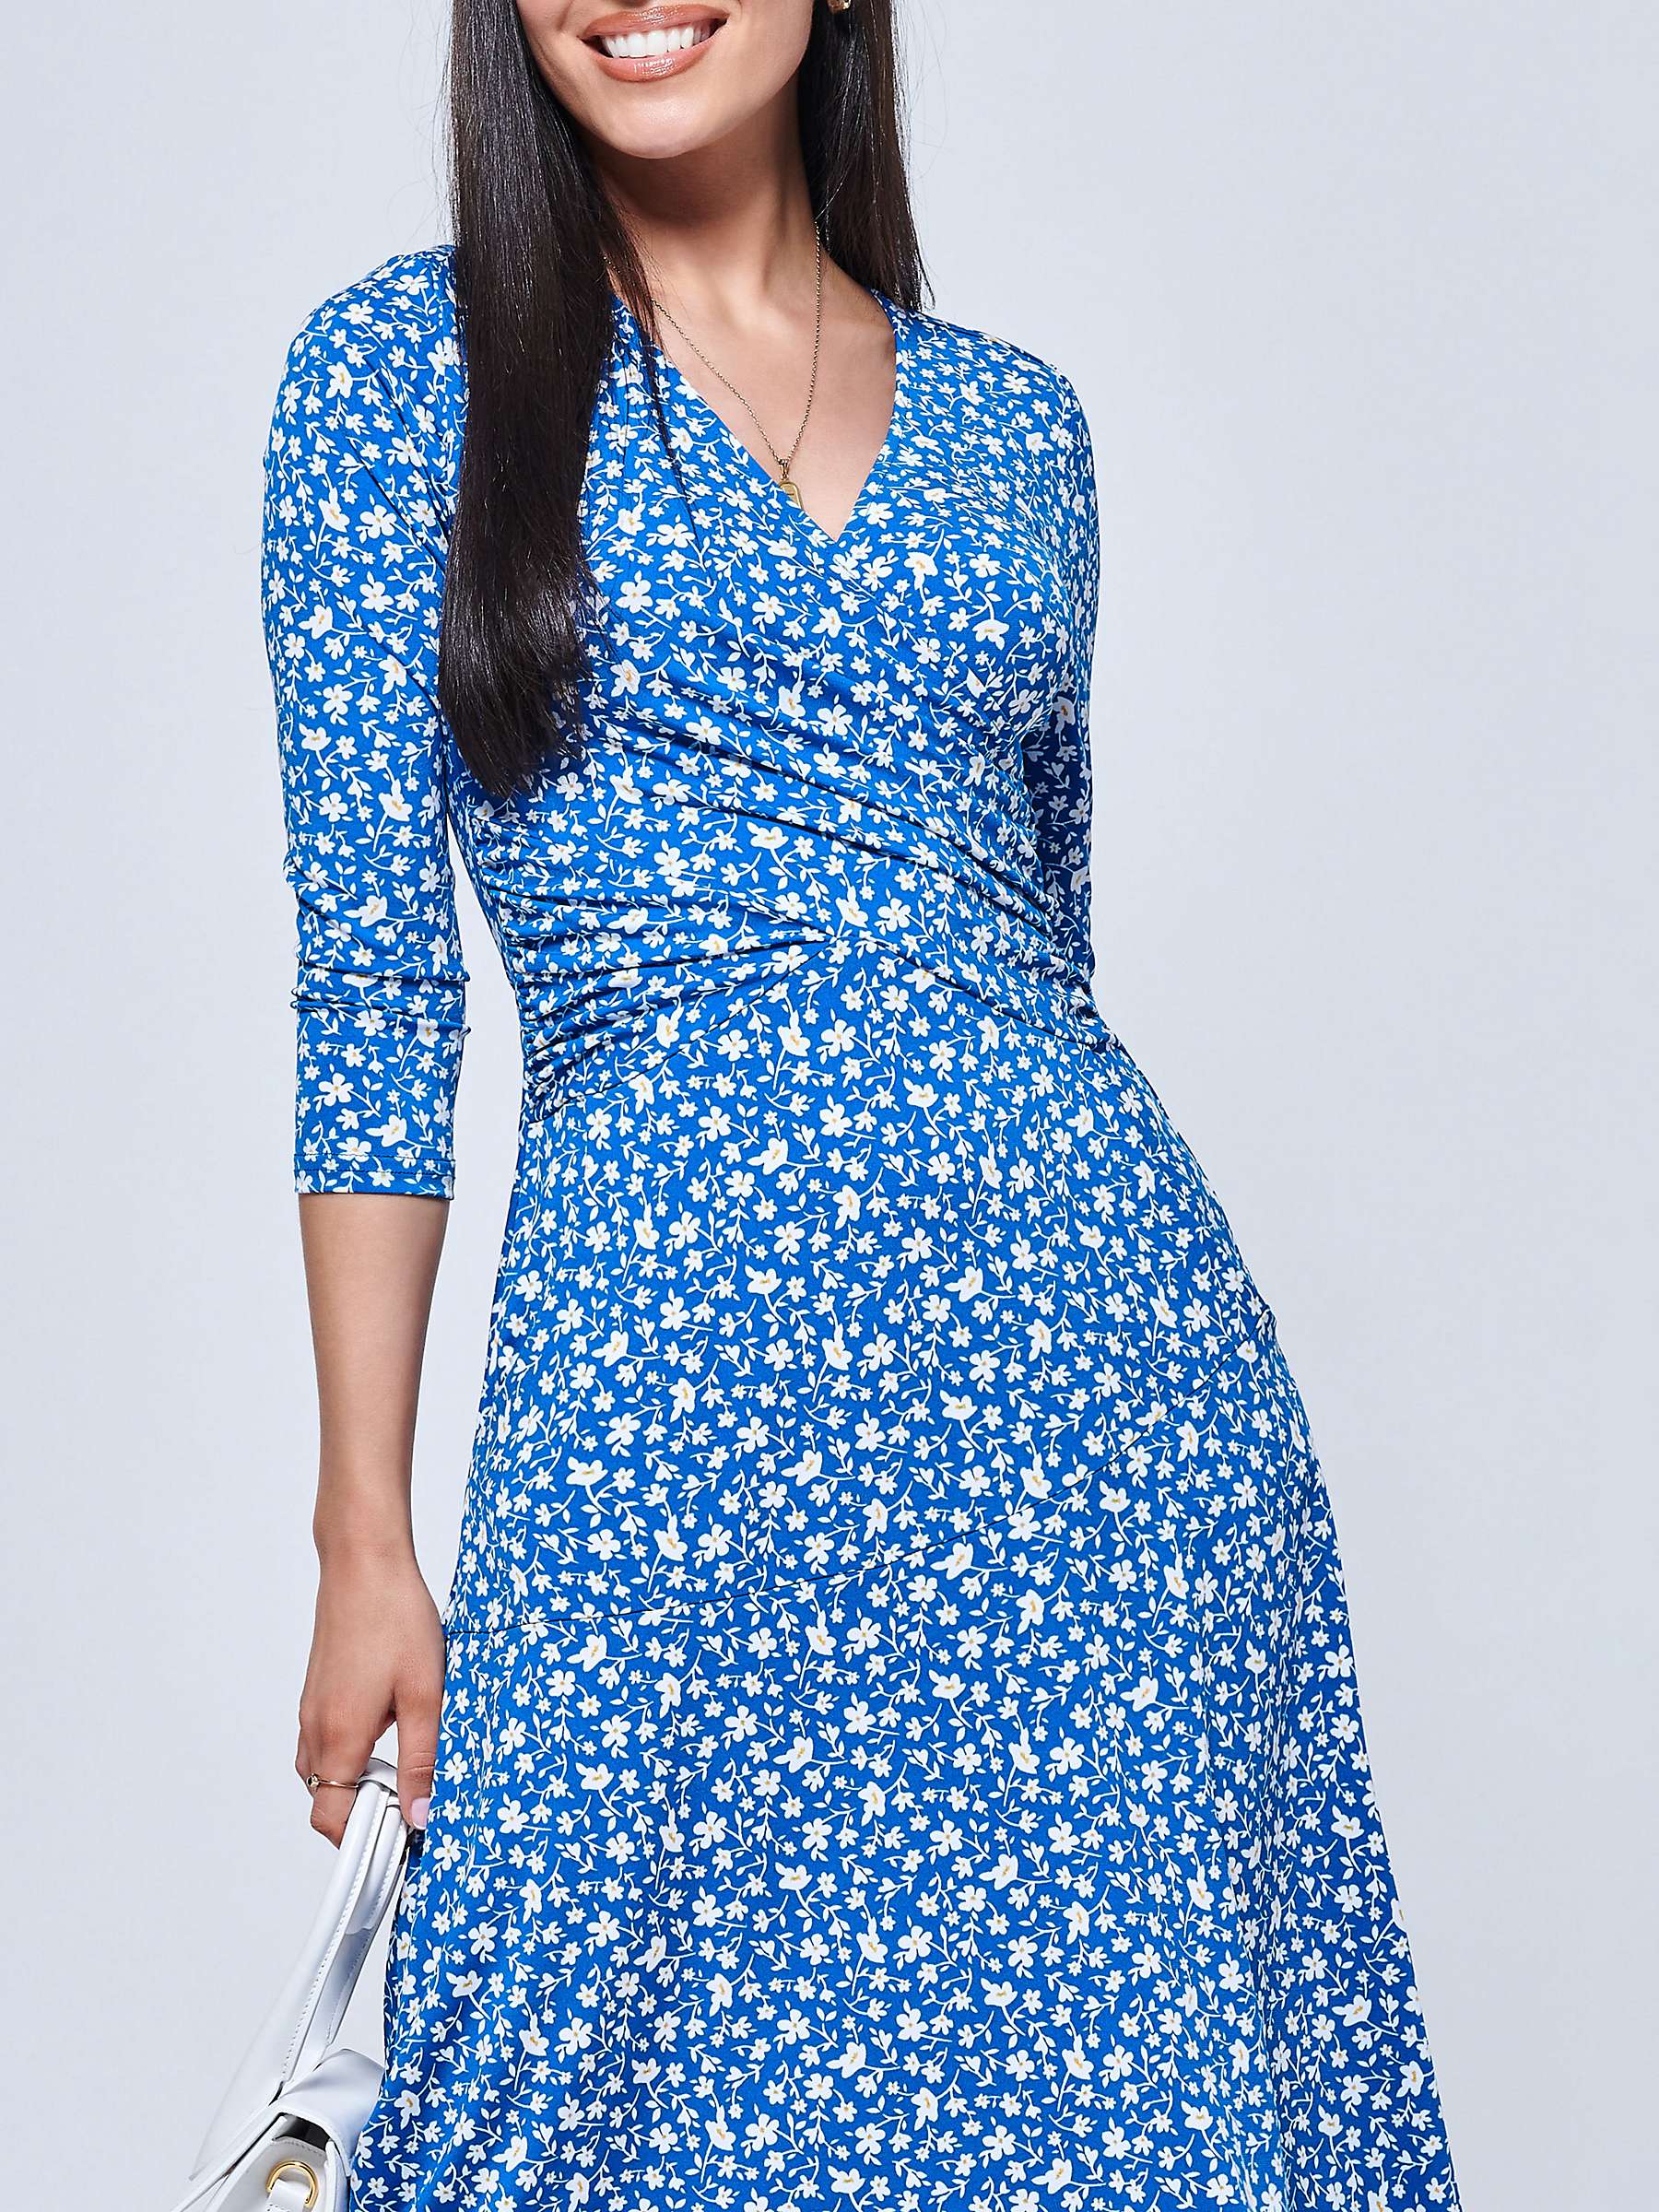 Buy Jolie Moi Gretta Floral Print Jersey Fit and Flare Dress Online at johnlewis.com